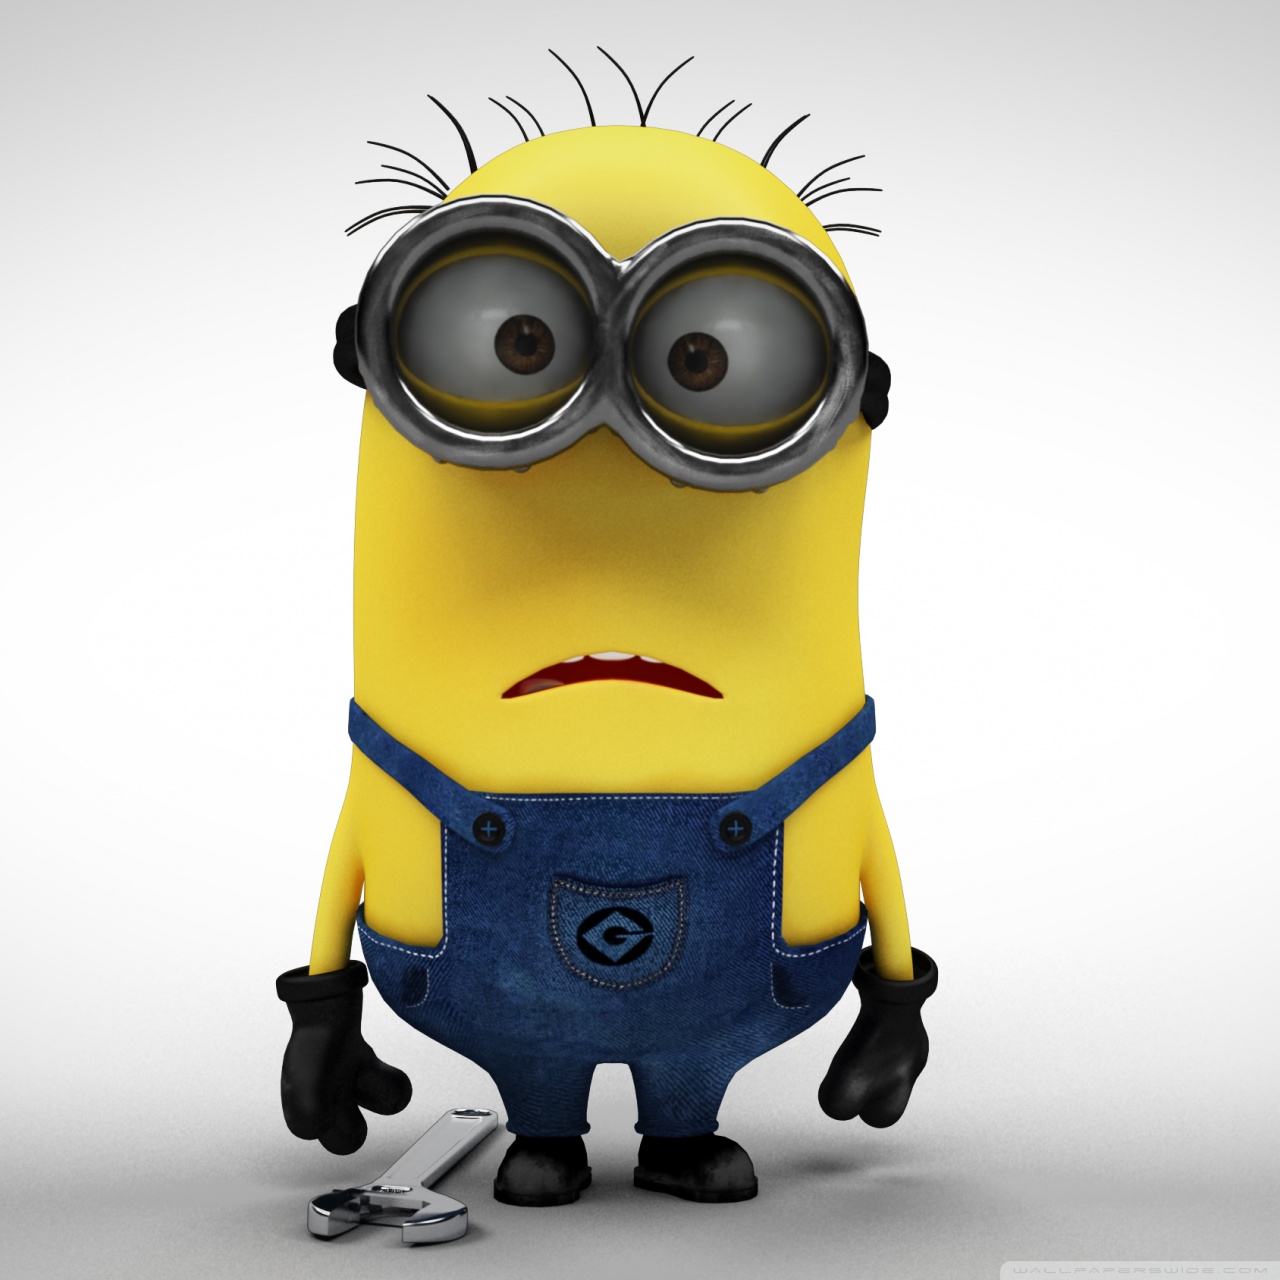 Minions Wallpaper For Android Tablets The Art Mad